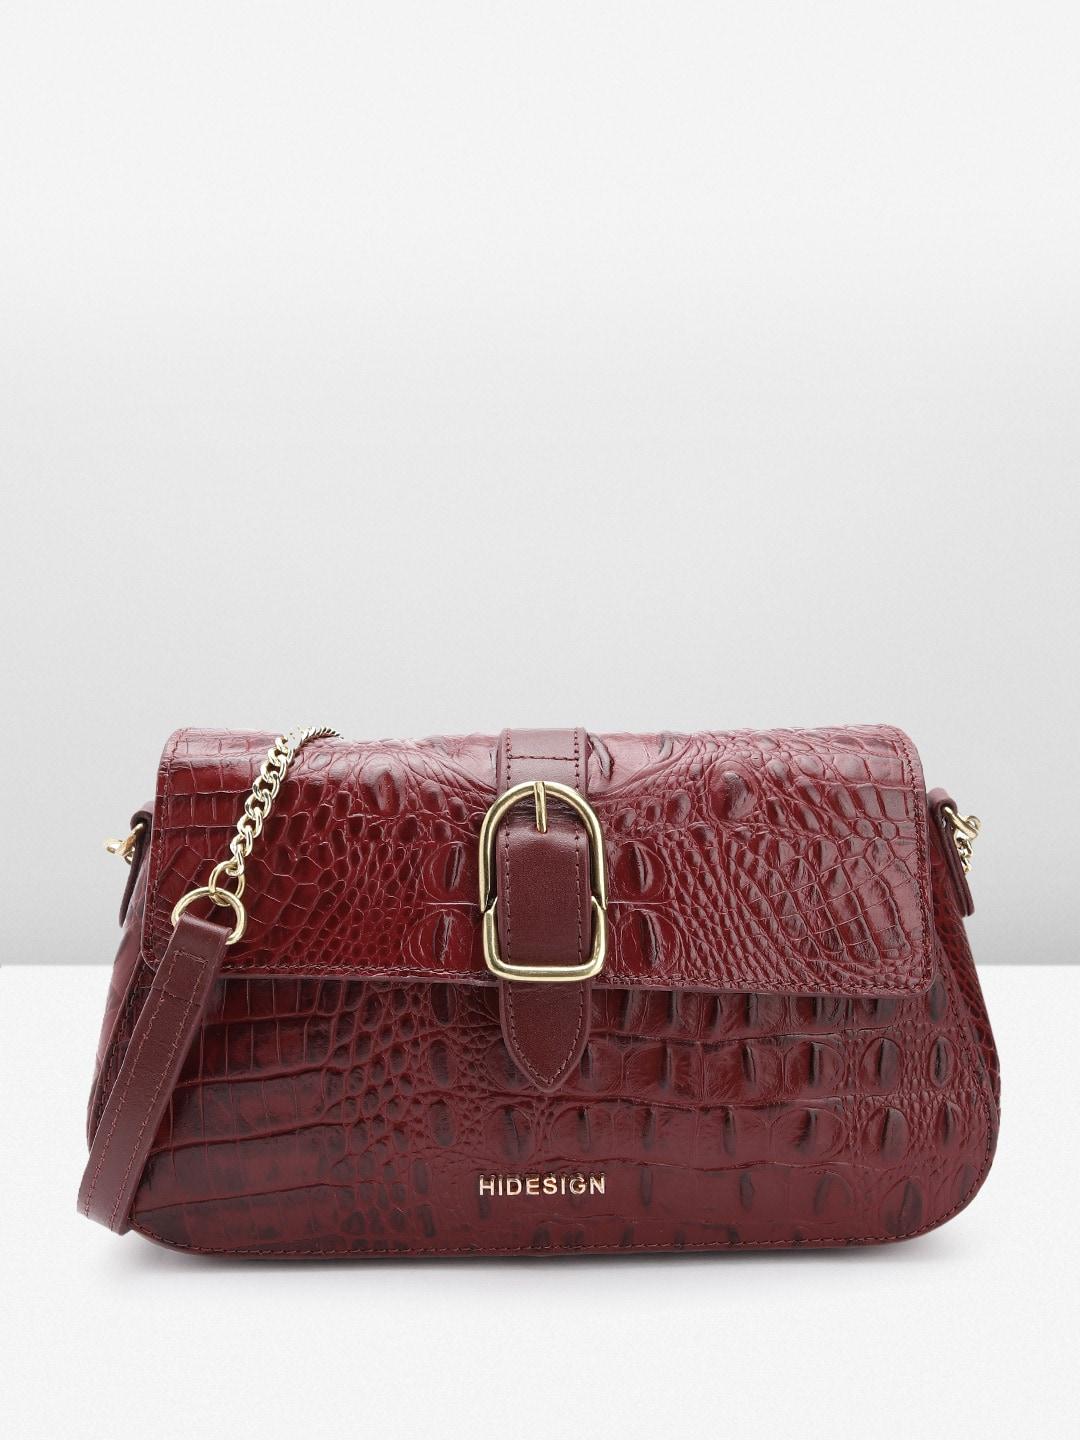 Hidesign Croc Textured Leather Structured Sling Bag with Buckle Detail